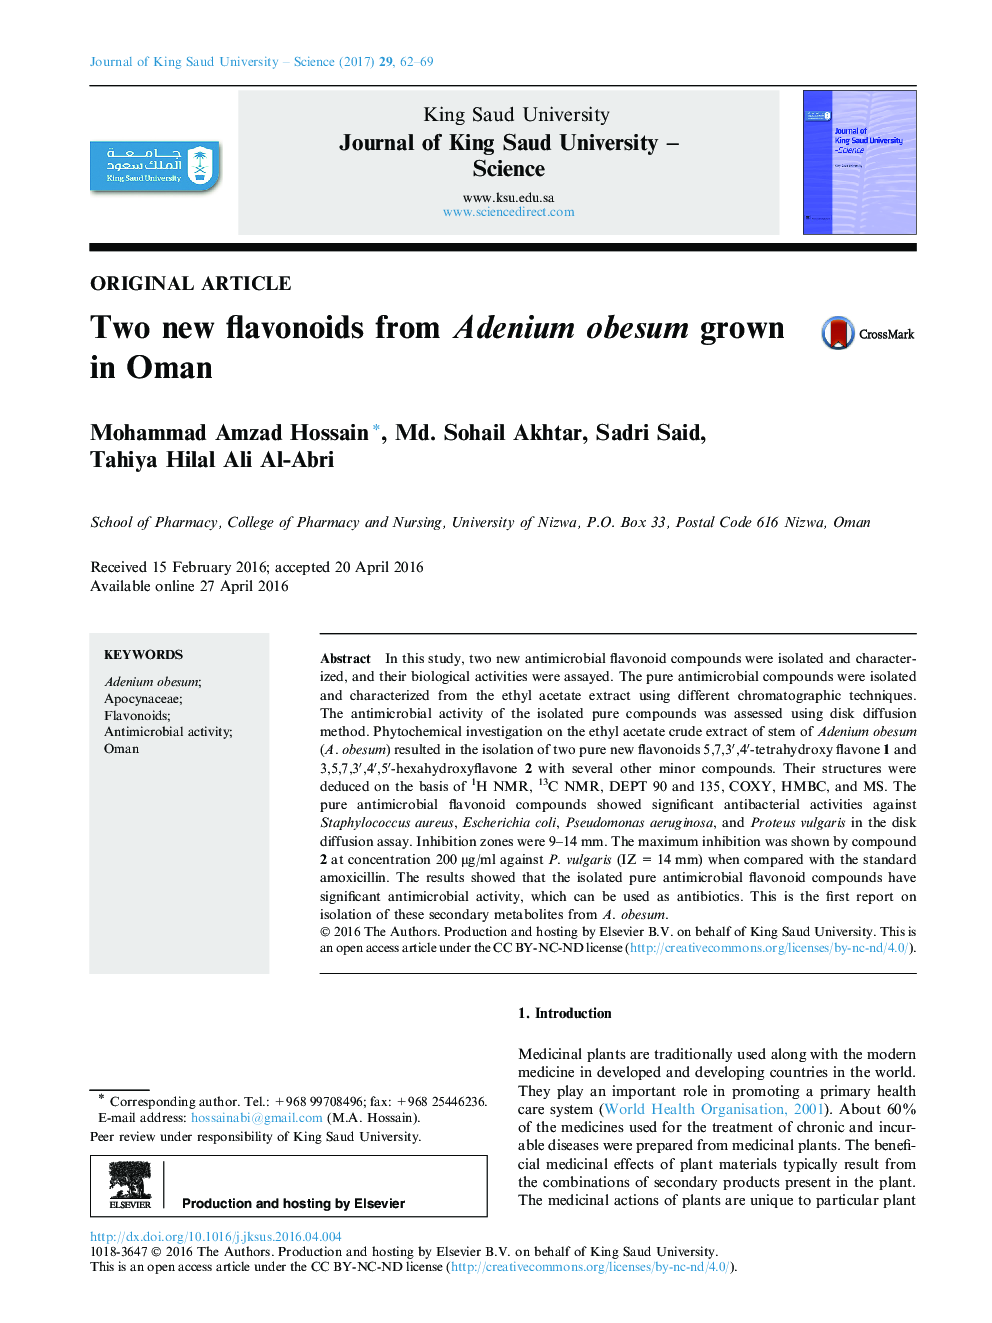 Two new flavonoids from Adenium obesum grown in Oman